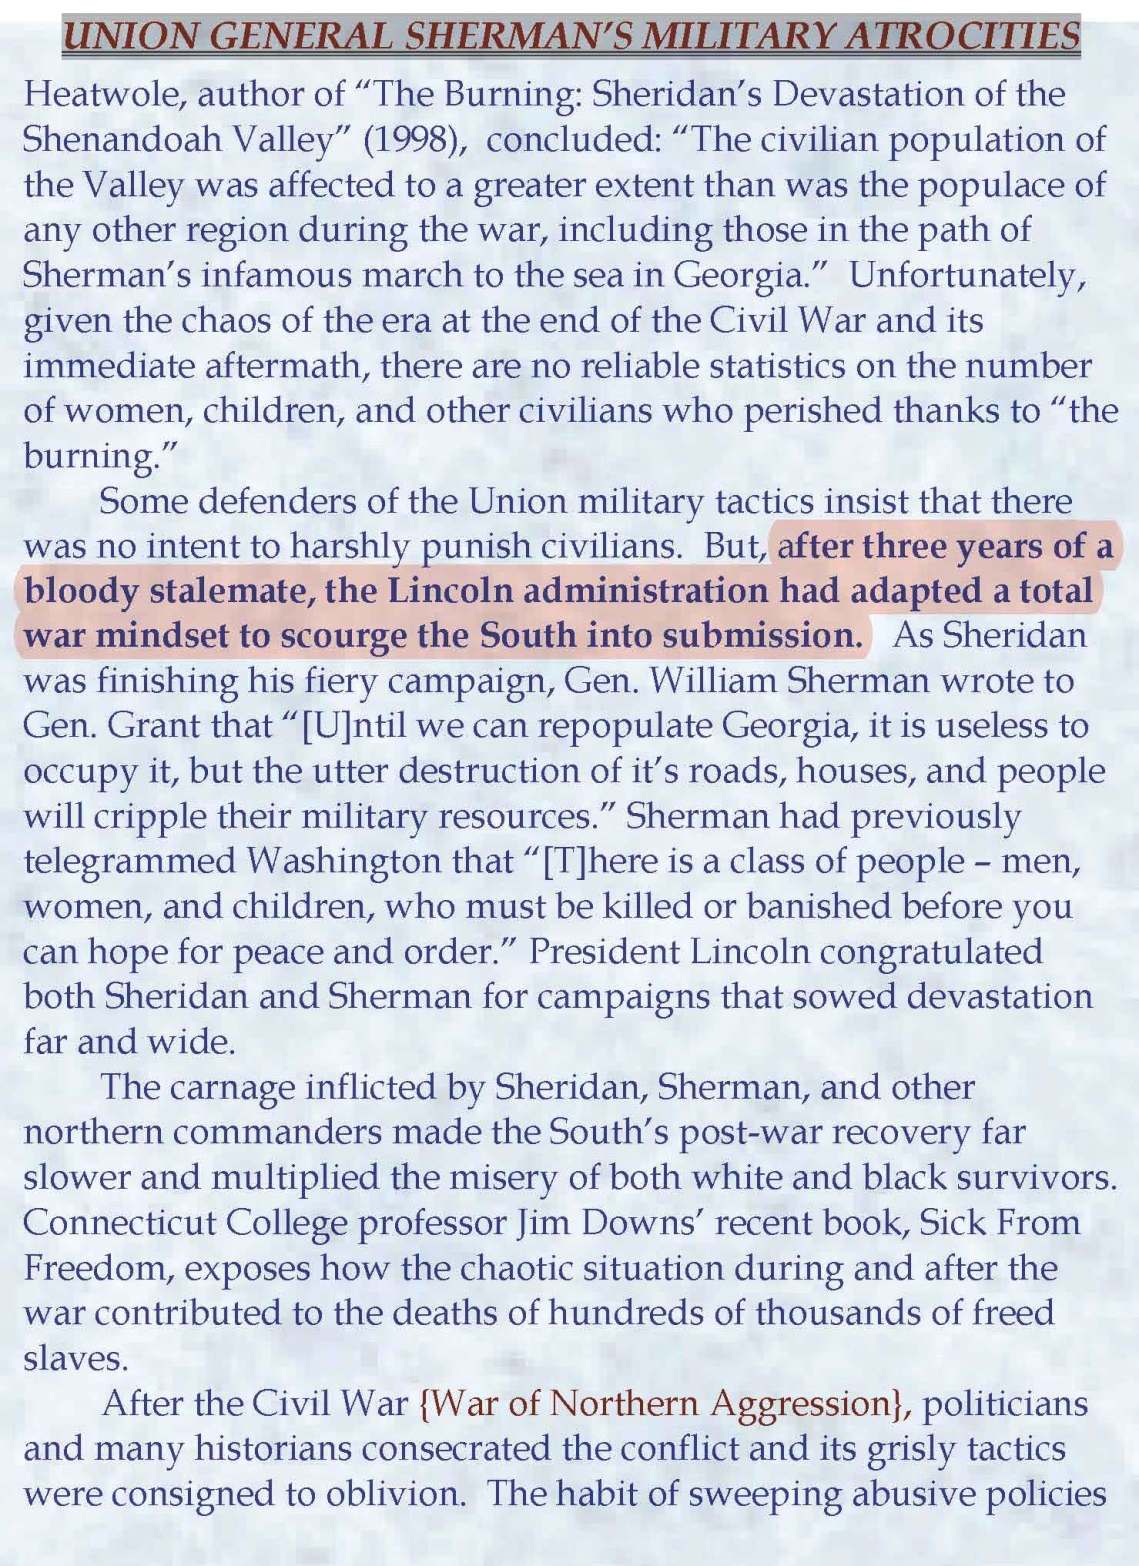 UNION GENERAL SHERMAN’S MILITARY ATROCITIES_Page_3